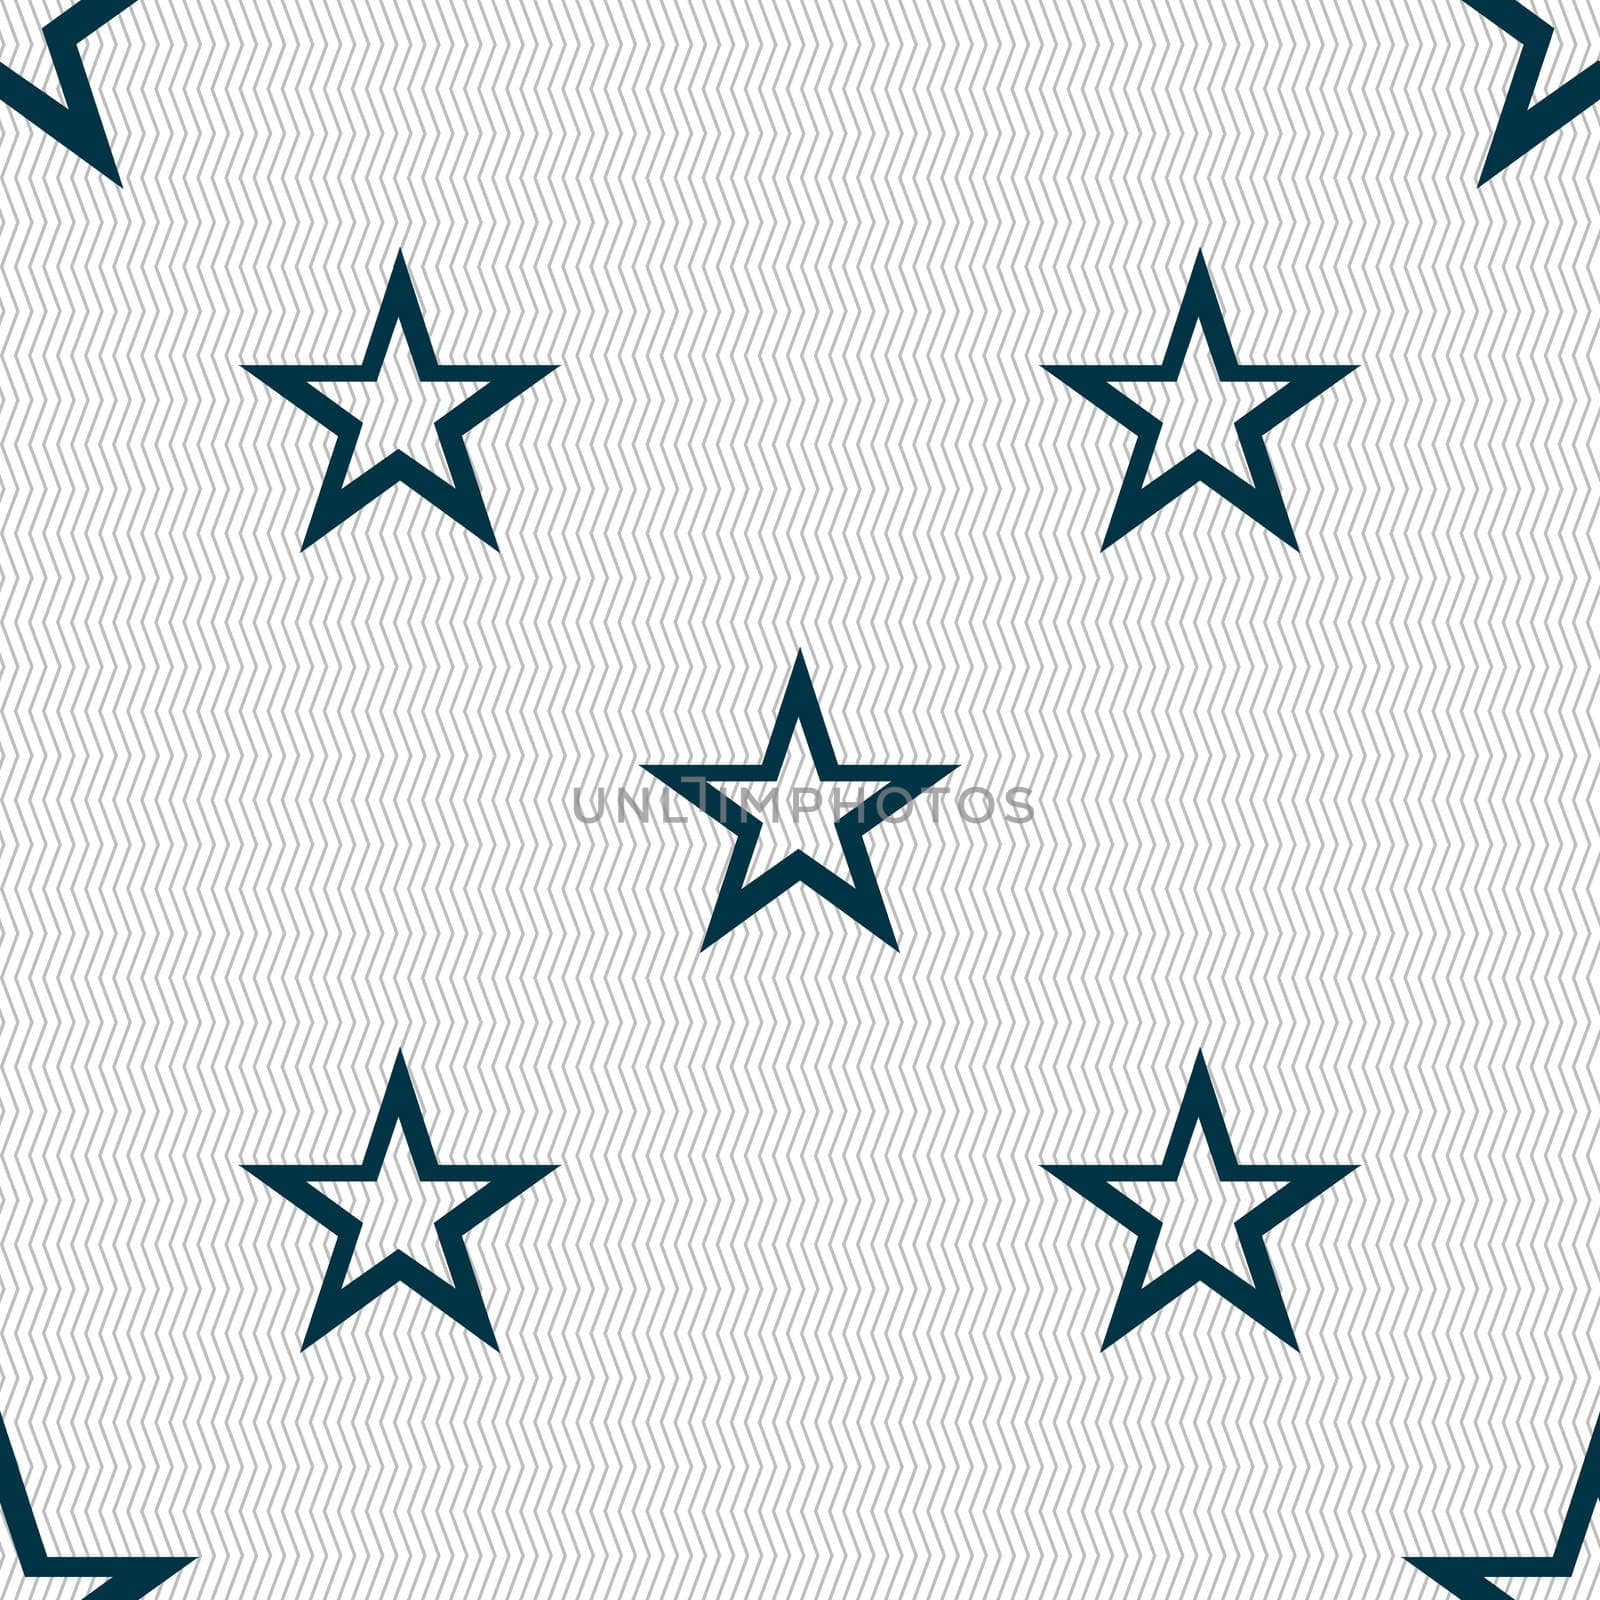 Star sign icon. Favorite button. Navigation symbol. Seamless abstract background with geometric shapes.  by serhii_lohvyniuk